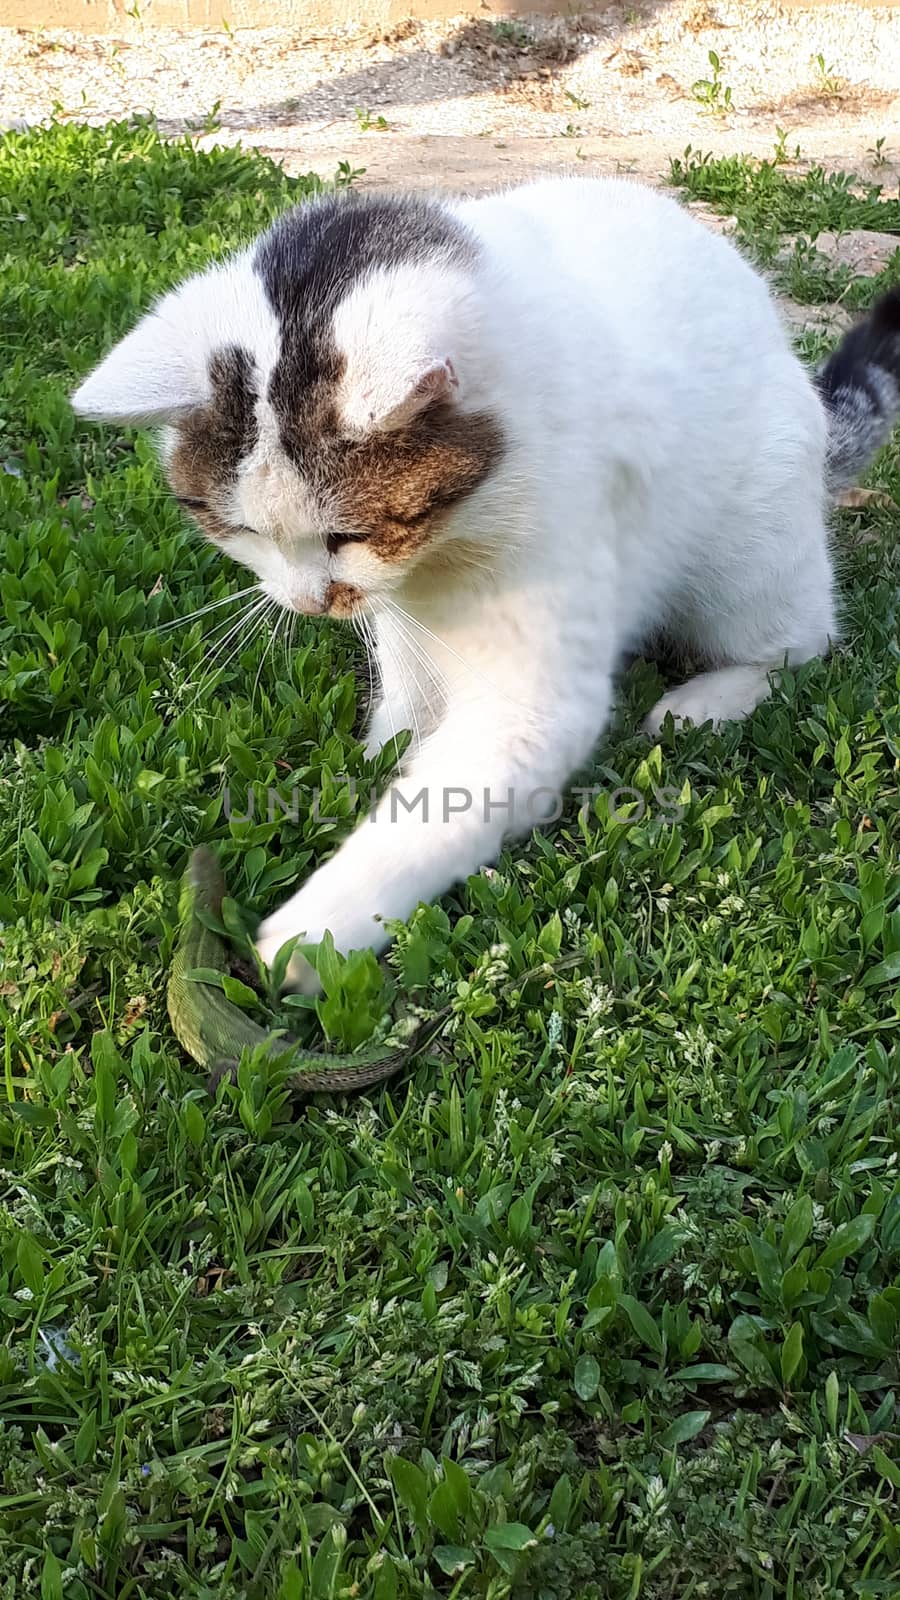 The kitten plays with a large green lizard.